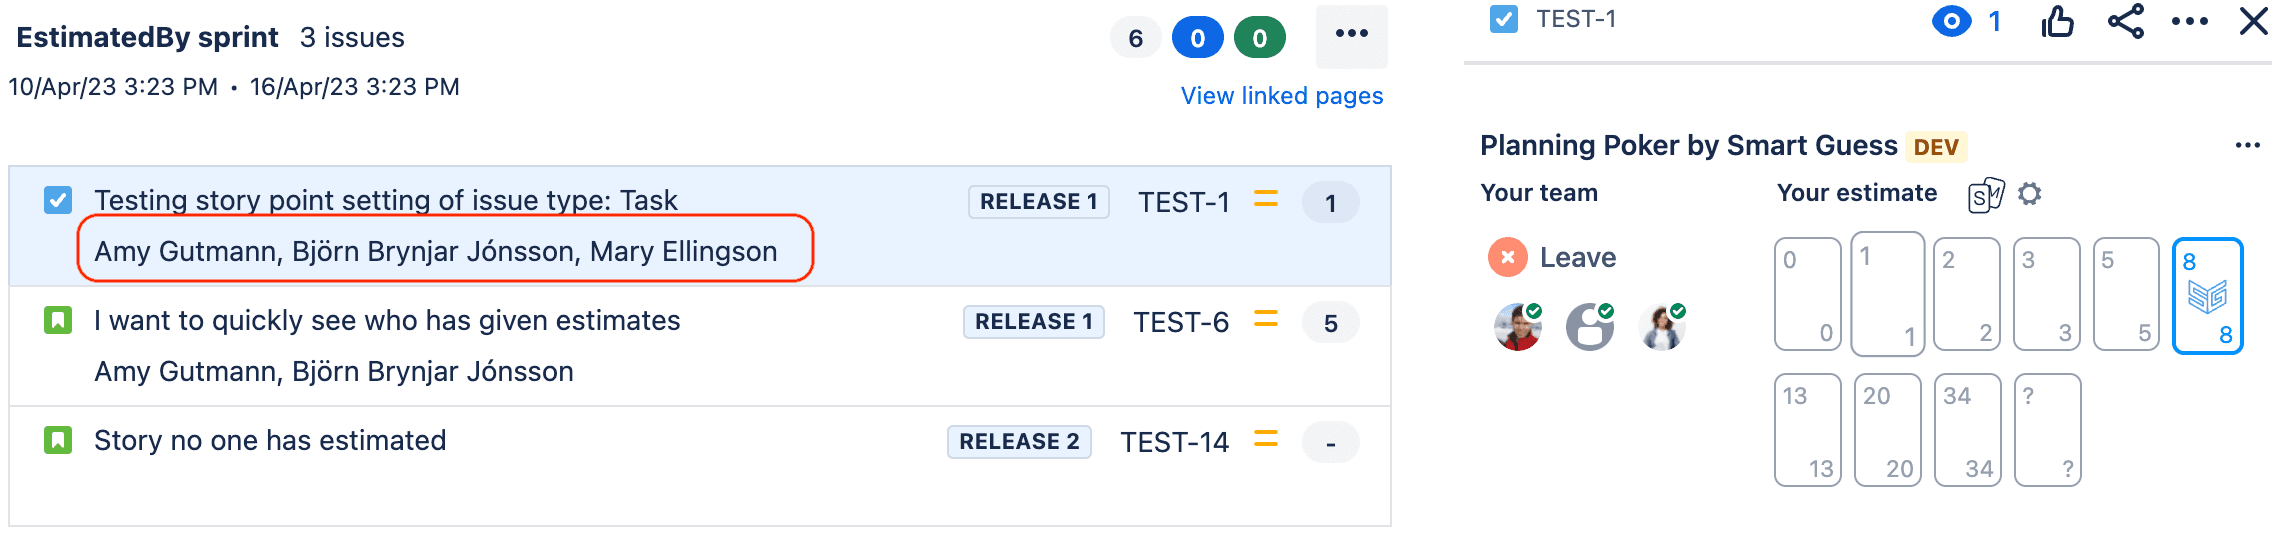 EstimatedBy field can now viewed in the Jira Backlog when configured correctly